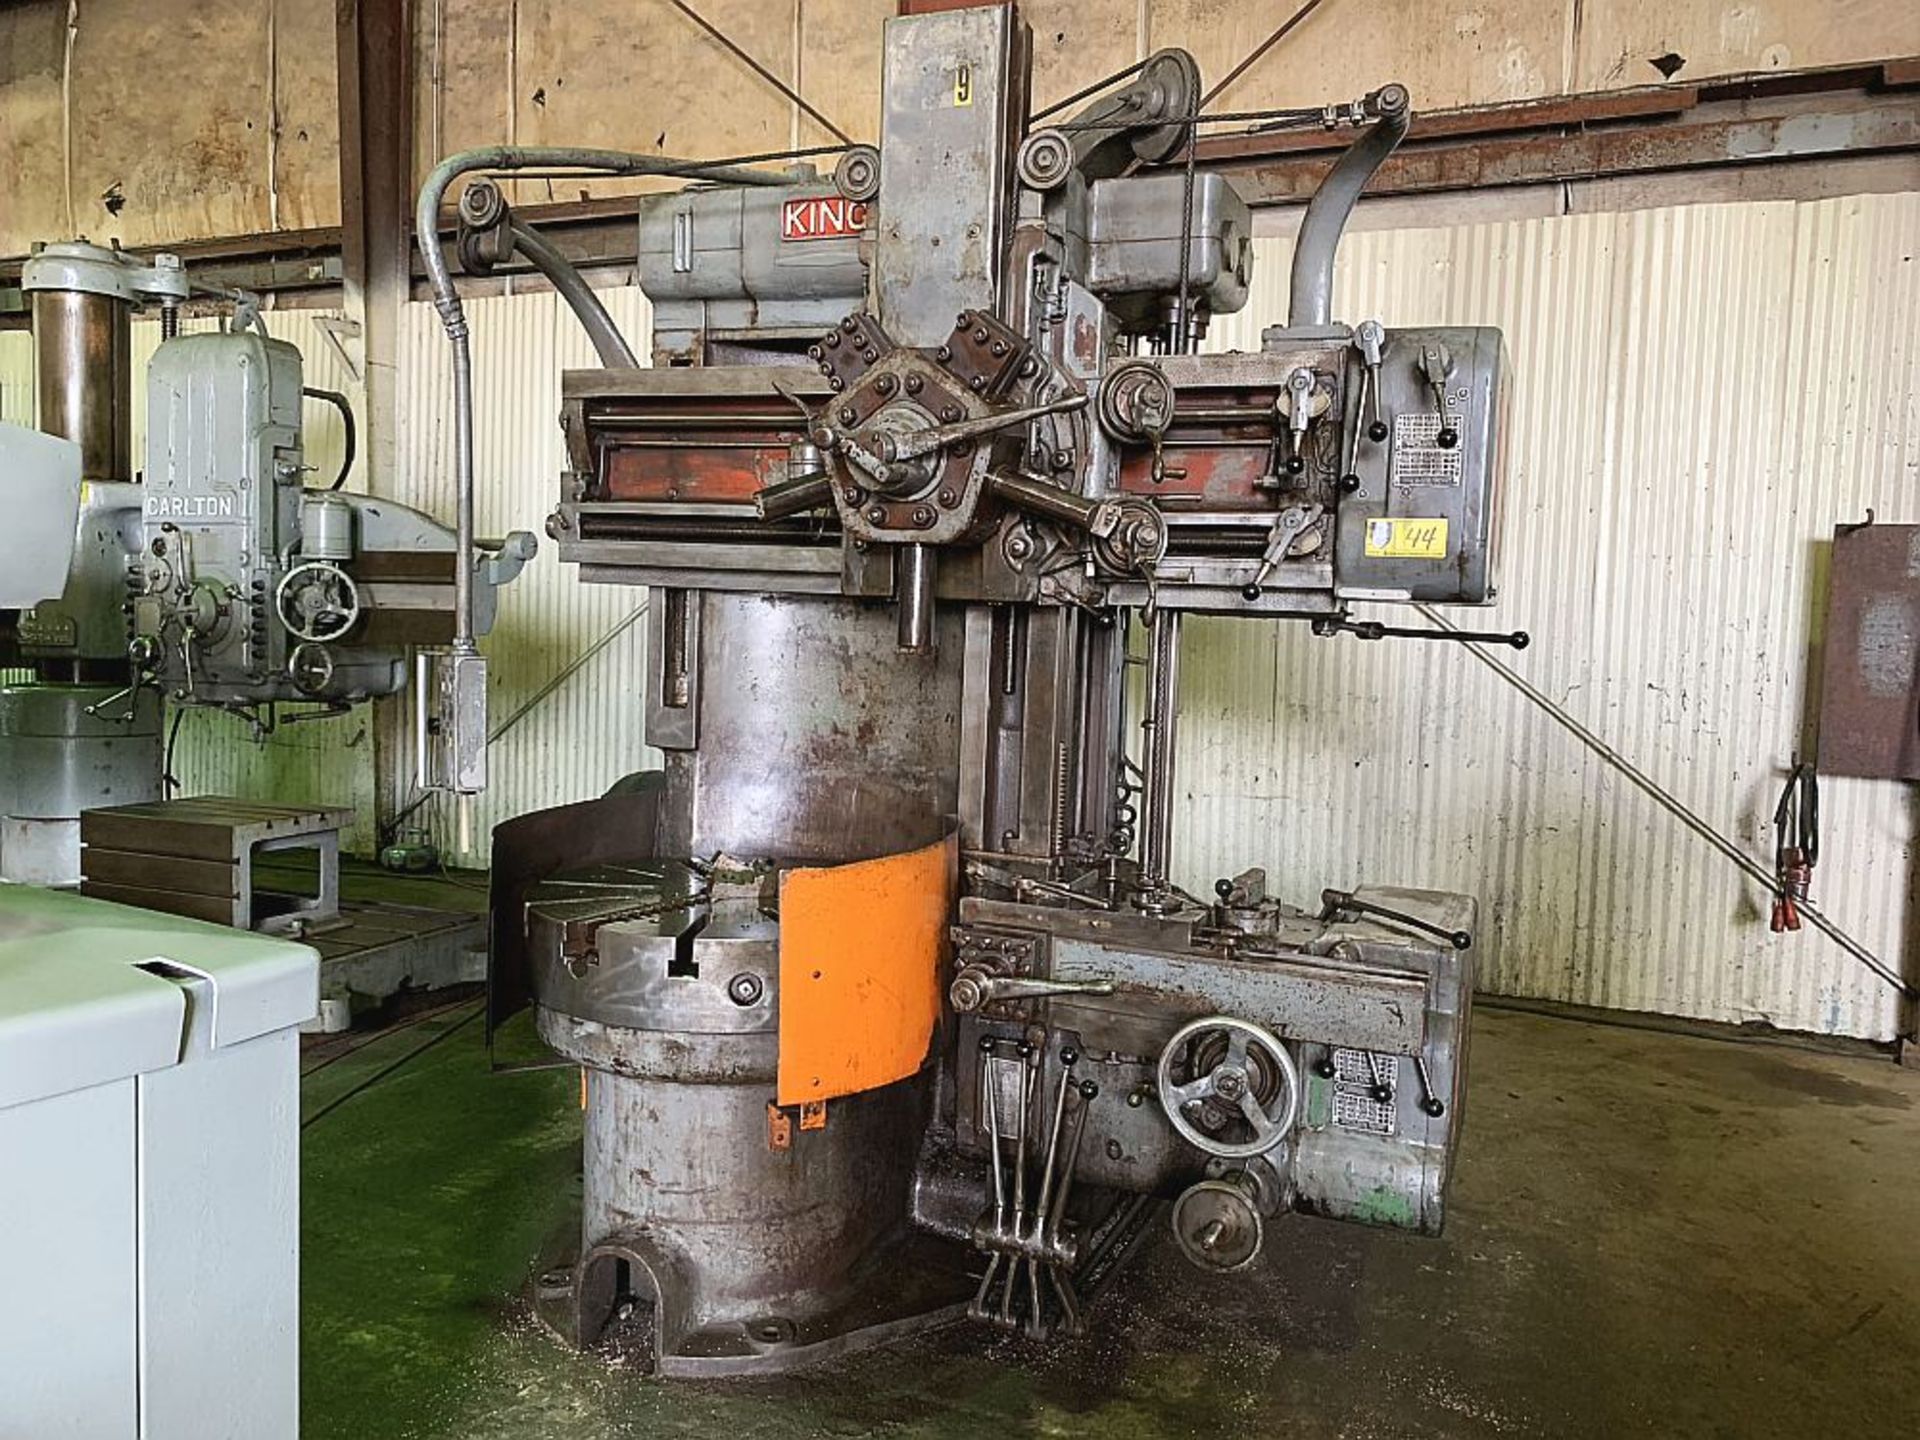 King Vertical Turret Lathe, 36" 3-jaw Table,